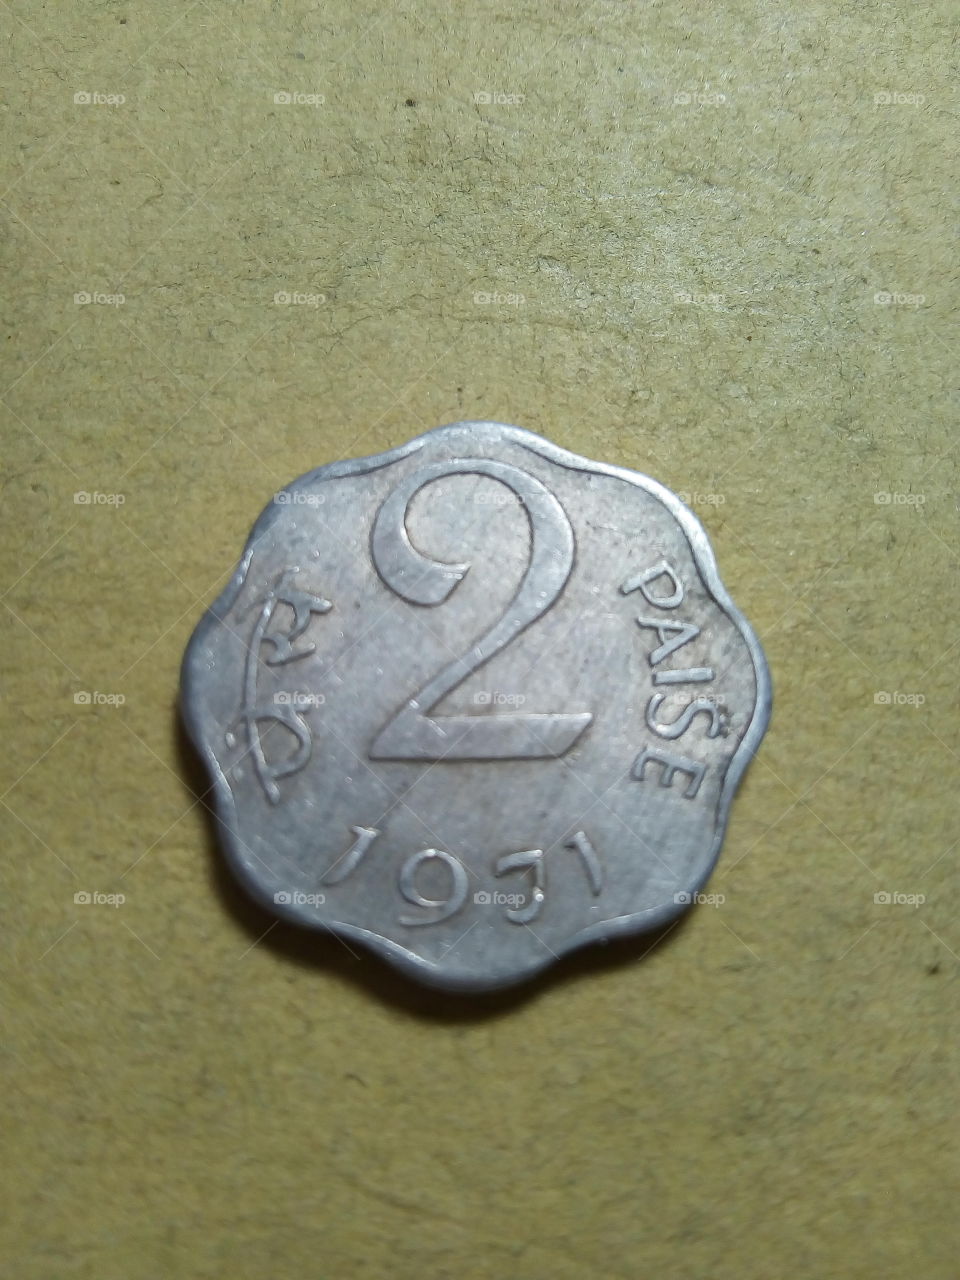 A coin of Two paise- 1/50 share of Indian Rupee issued by Government of India in 1971.